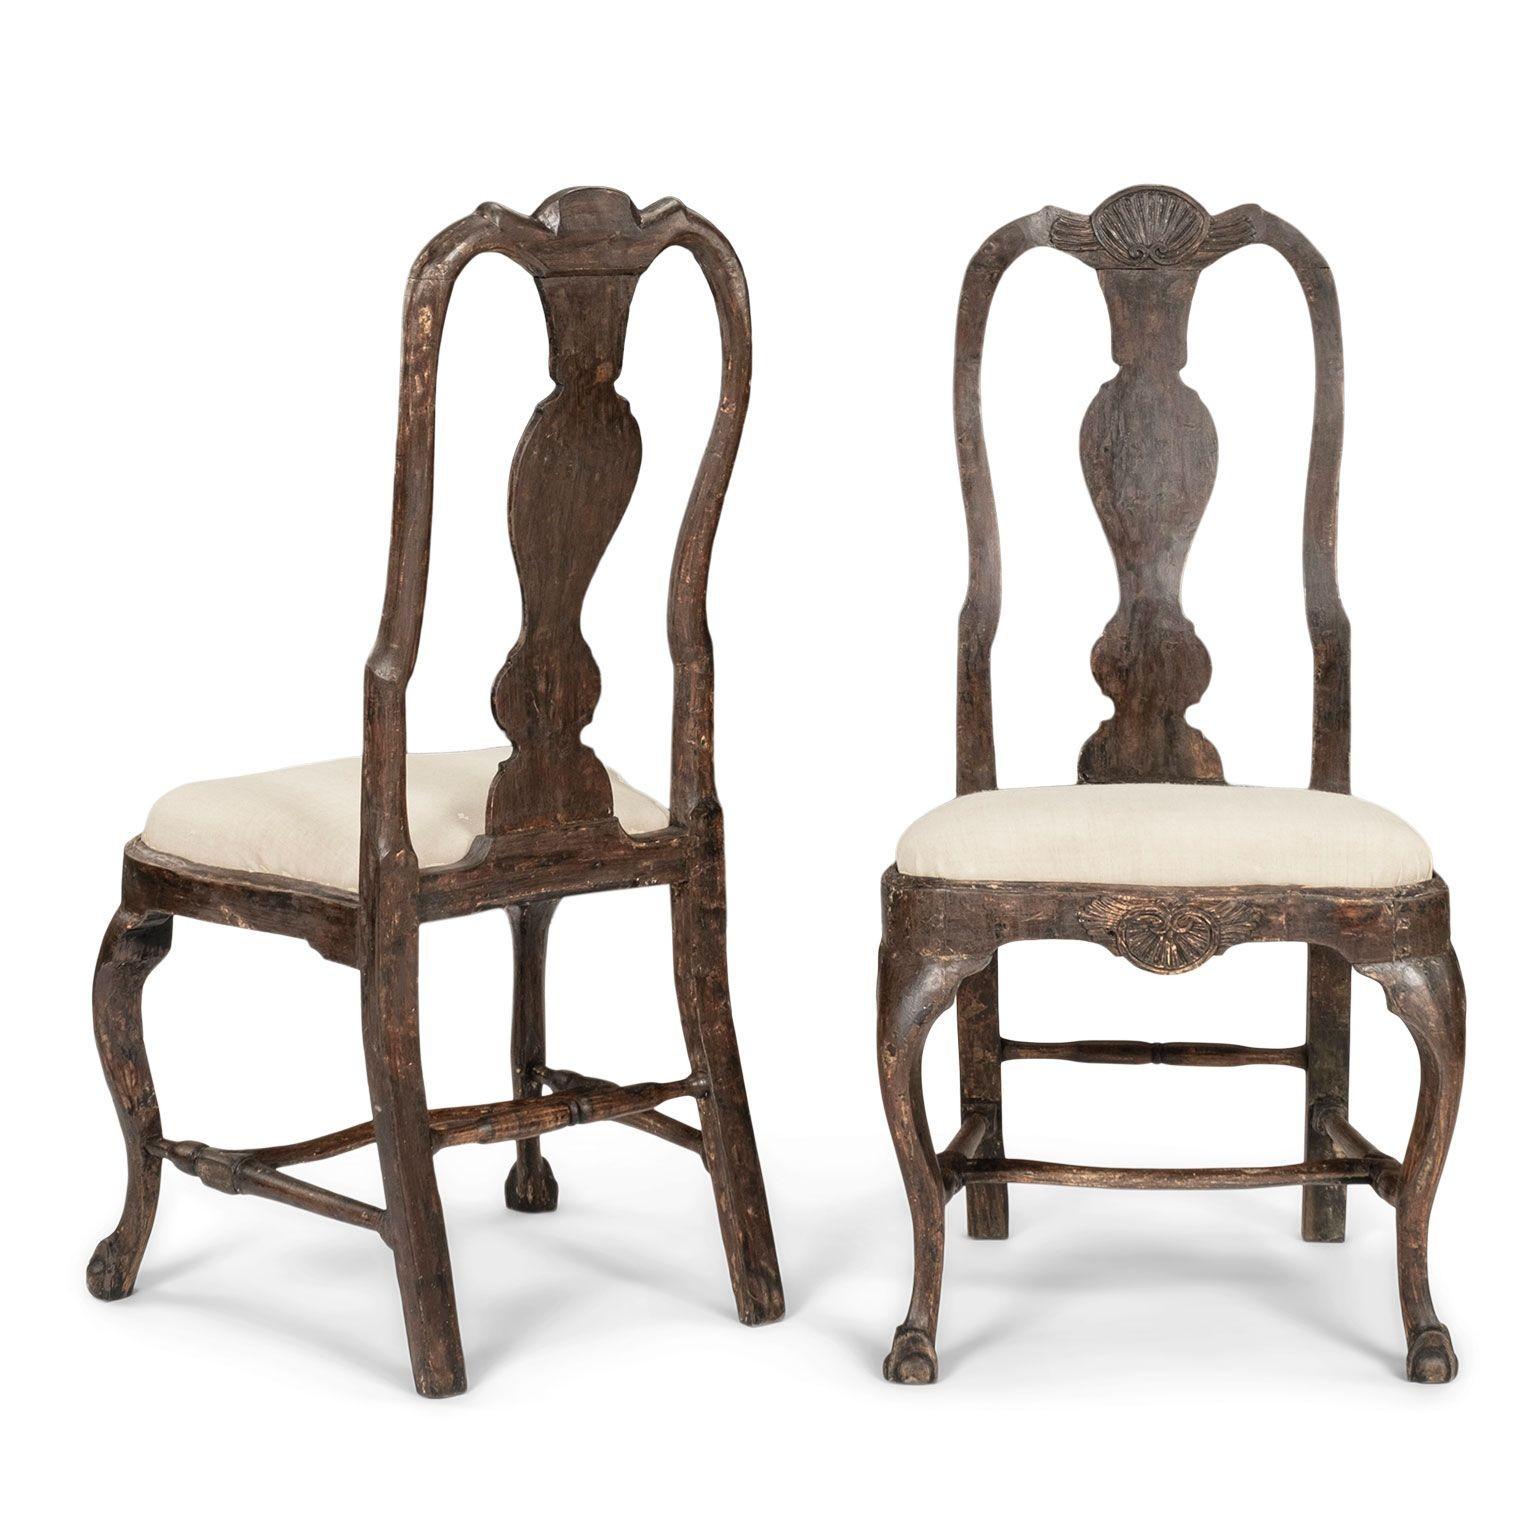 Pair of Swedish rococo period chairs, hand-carved circa 1745-1774. Finish gently scraped back to original and early layers of paint. Shell motif carved into frieze and crest. Cabriole front legs resting upon finely carved claw and ball feet. Seat